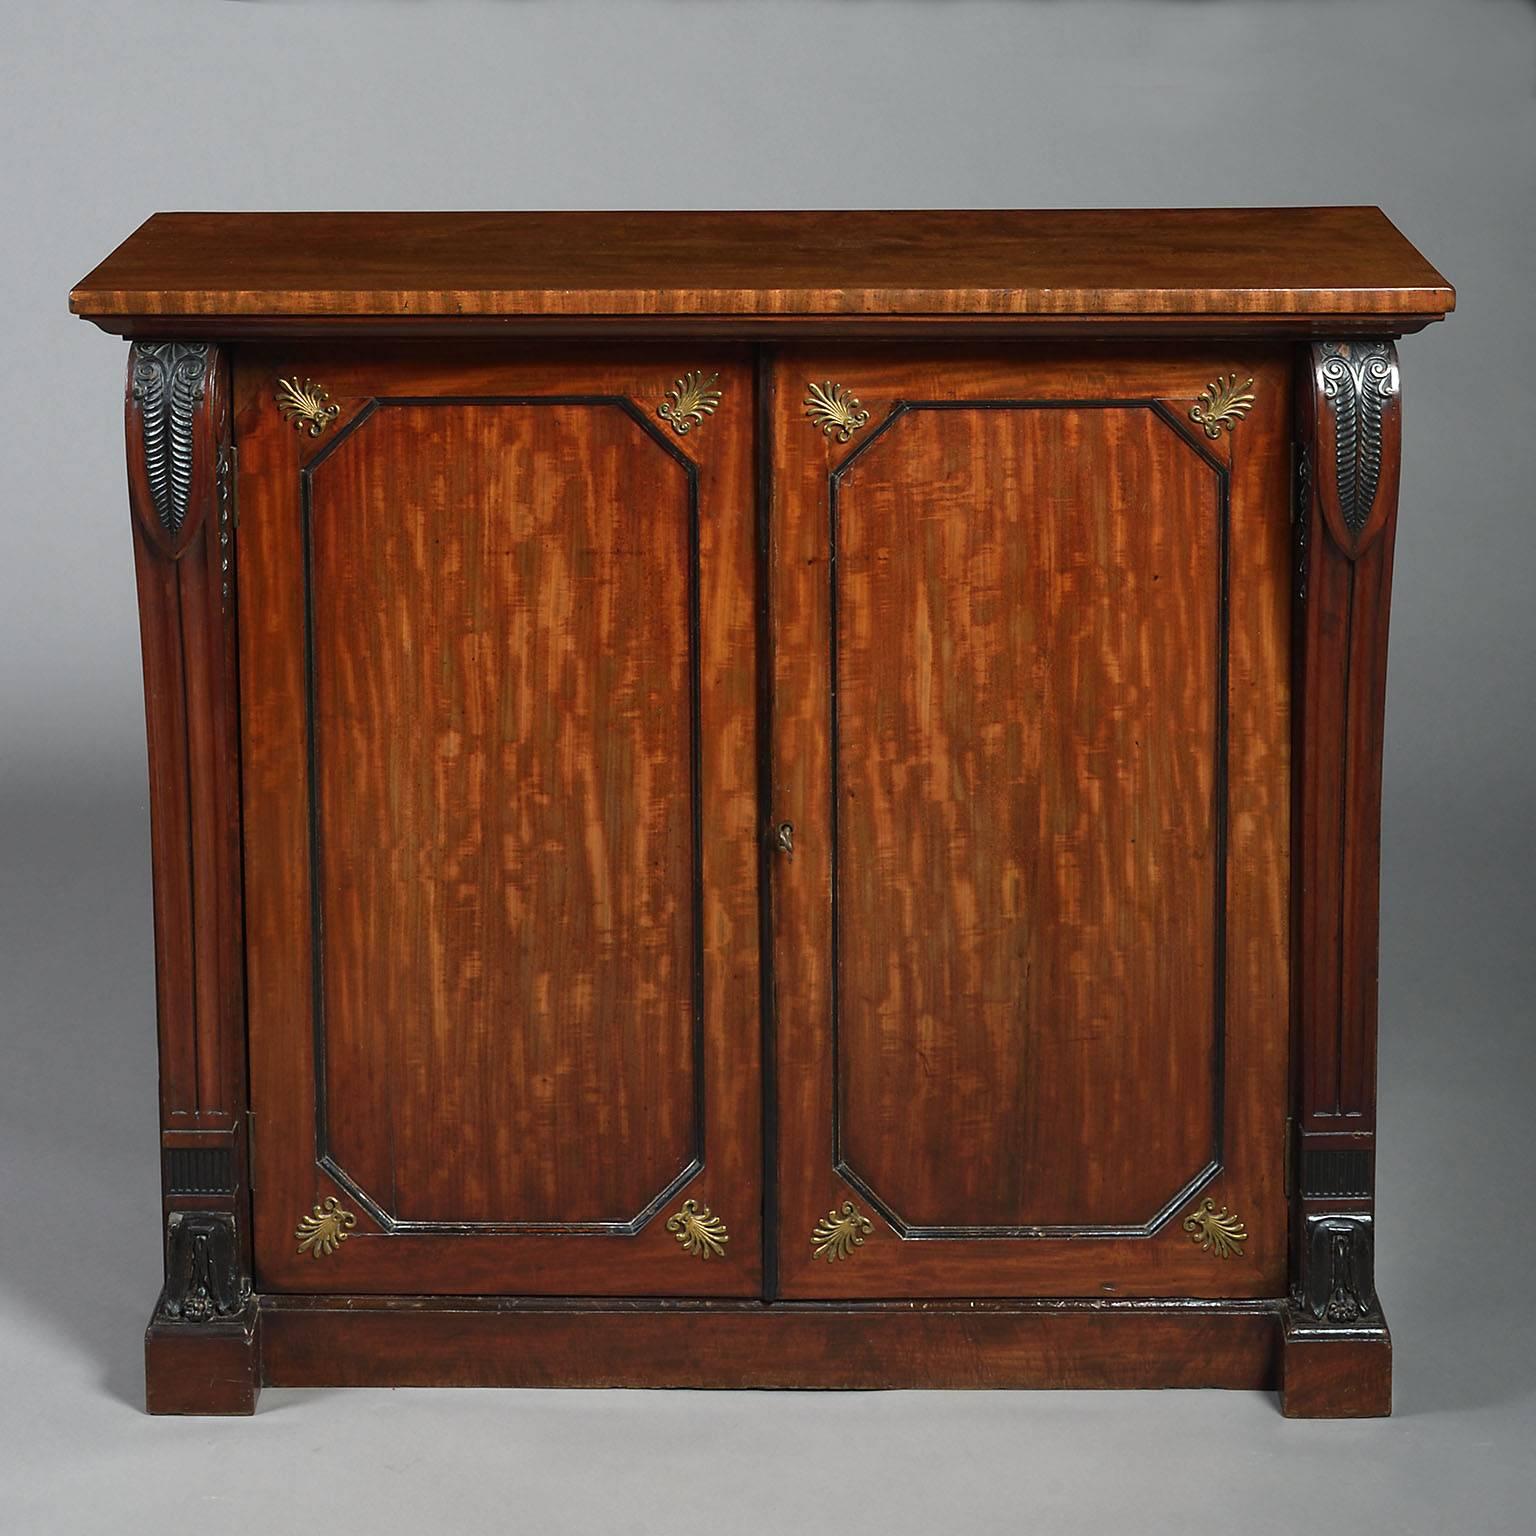 A fine Regency early 19th century mahogany side cabinet, with two doors and vitruvian scrolled uprights and brass anthemions.